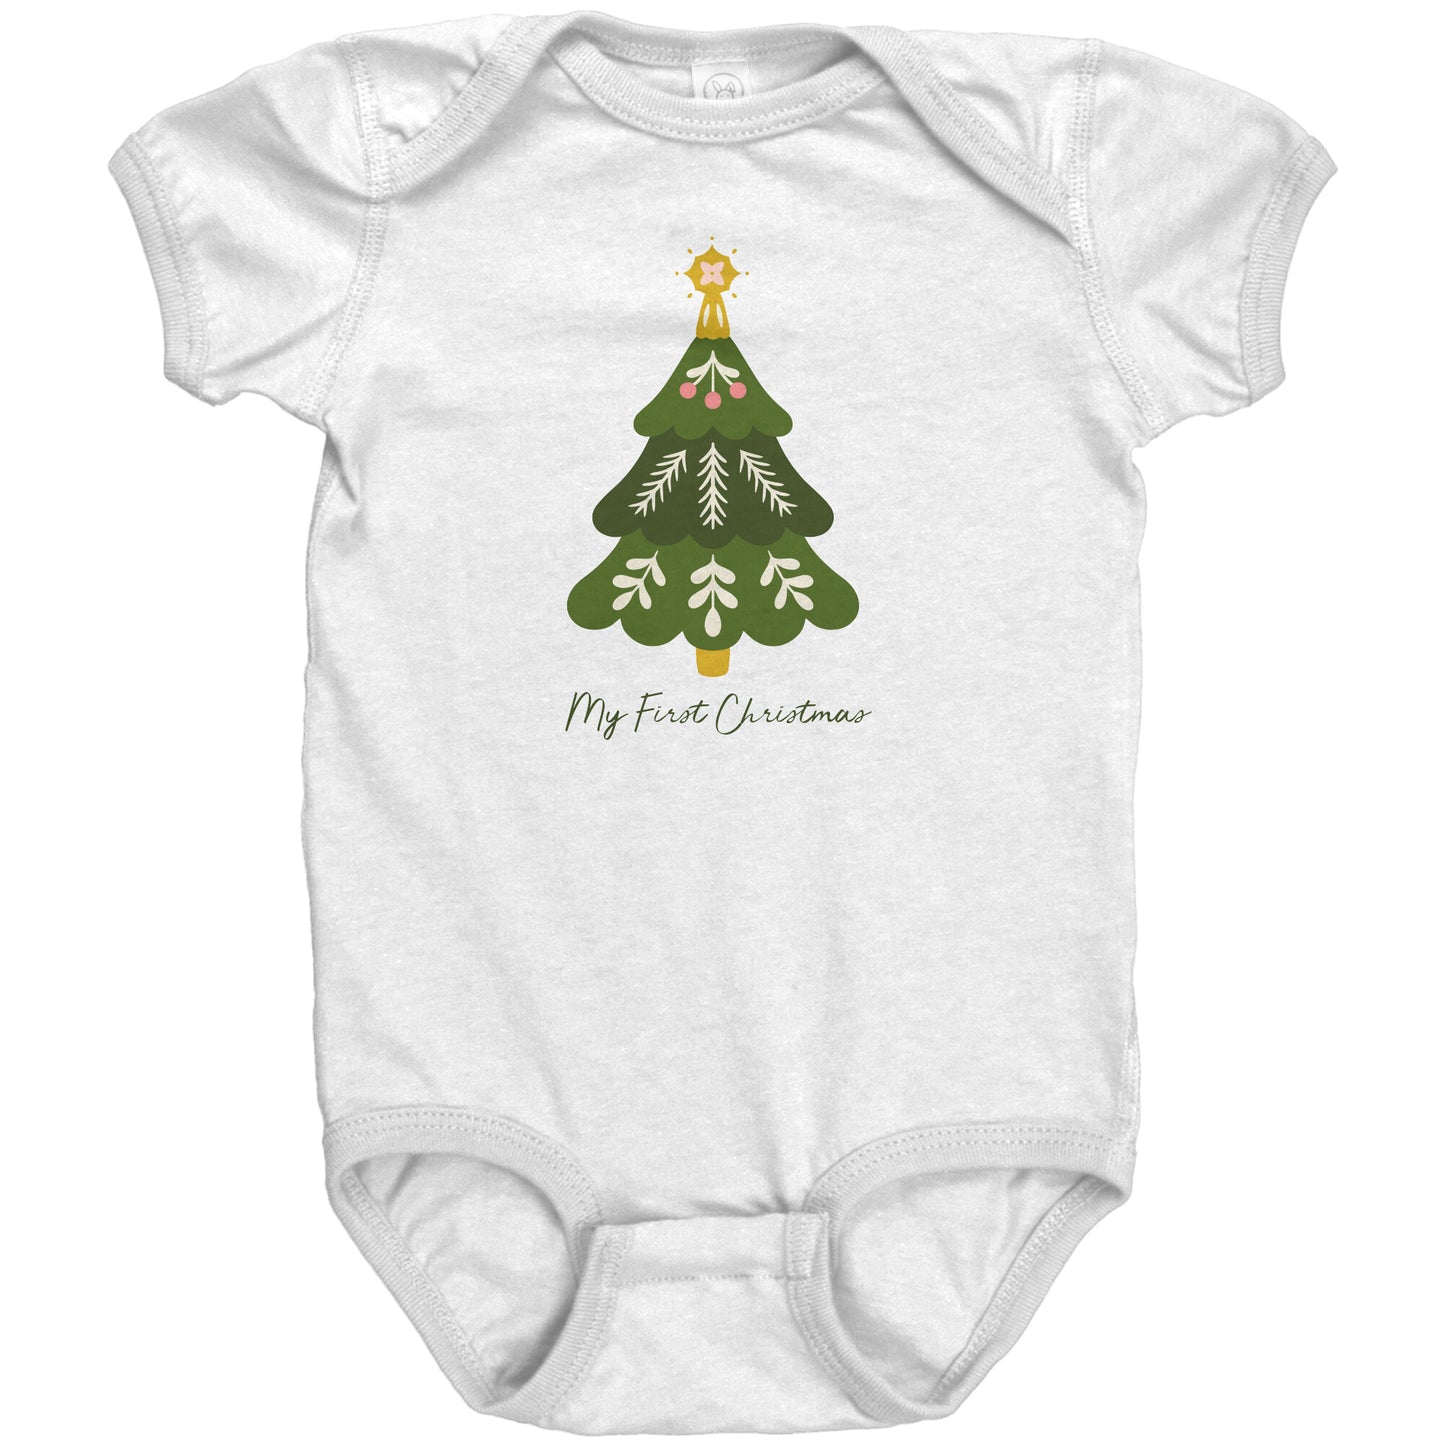 My First Christmas Baby One-Piece Bodysuit, White Short Sleeve